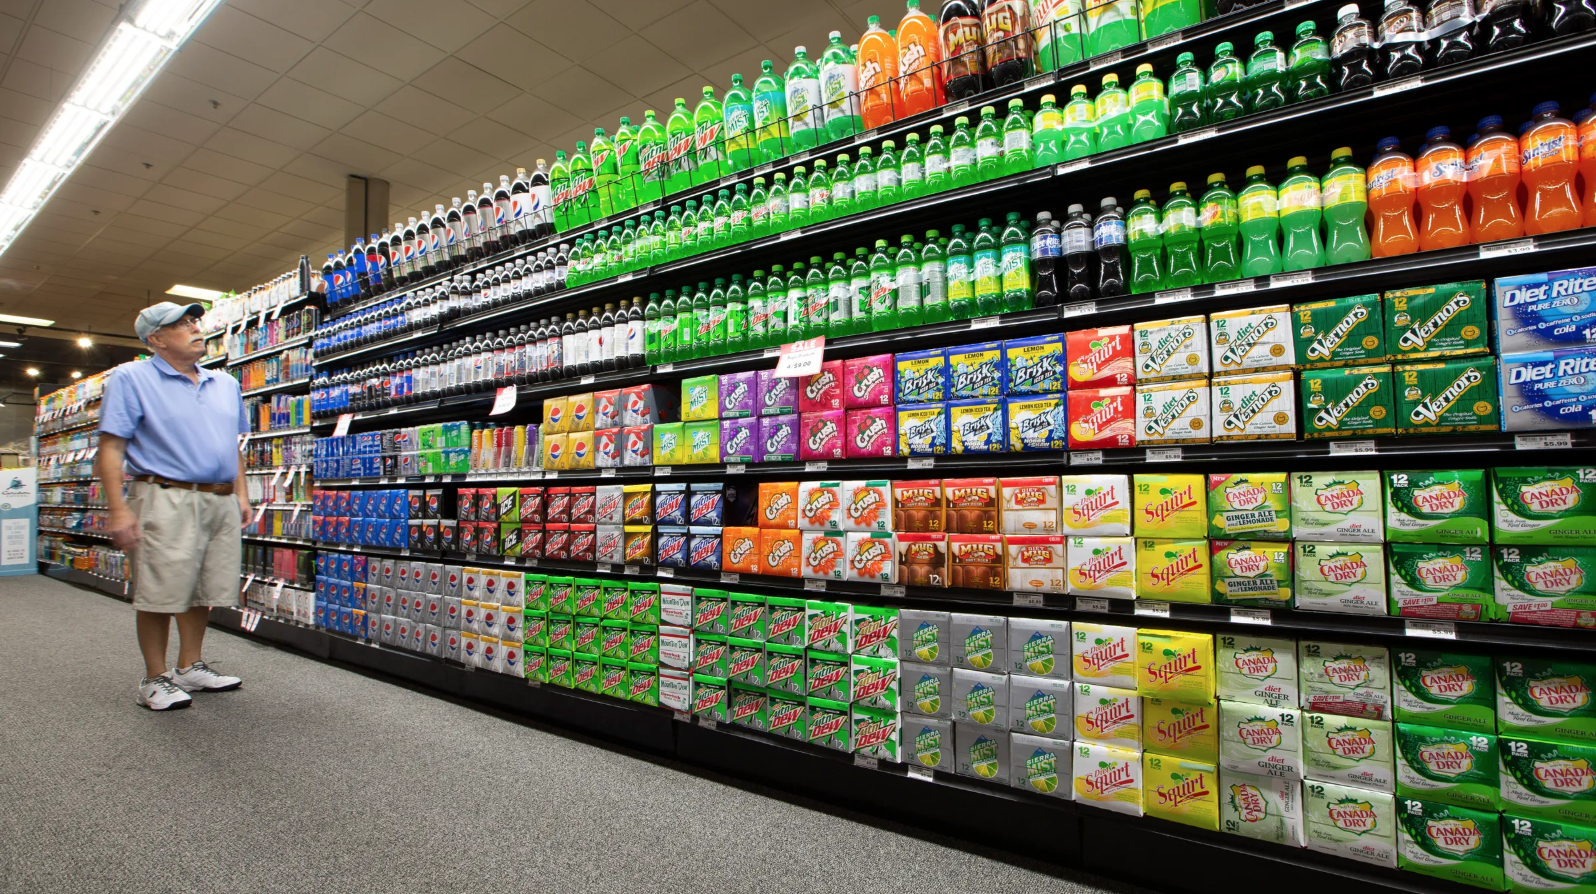 Steve Close of Fox Point shops in an aisle of sodas, energy drinks, drink mixers and more at Sendik's Food Market in Mequon. Image courtesy of Colin Boyle. United States, 2019.